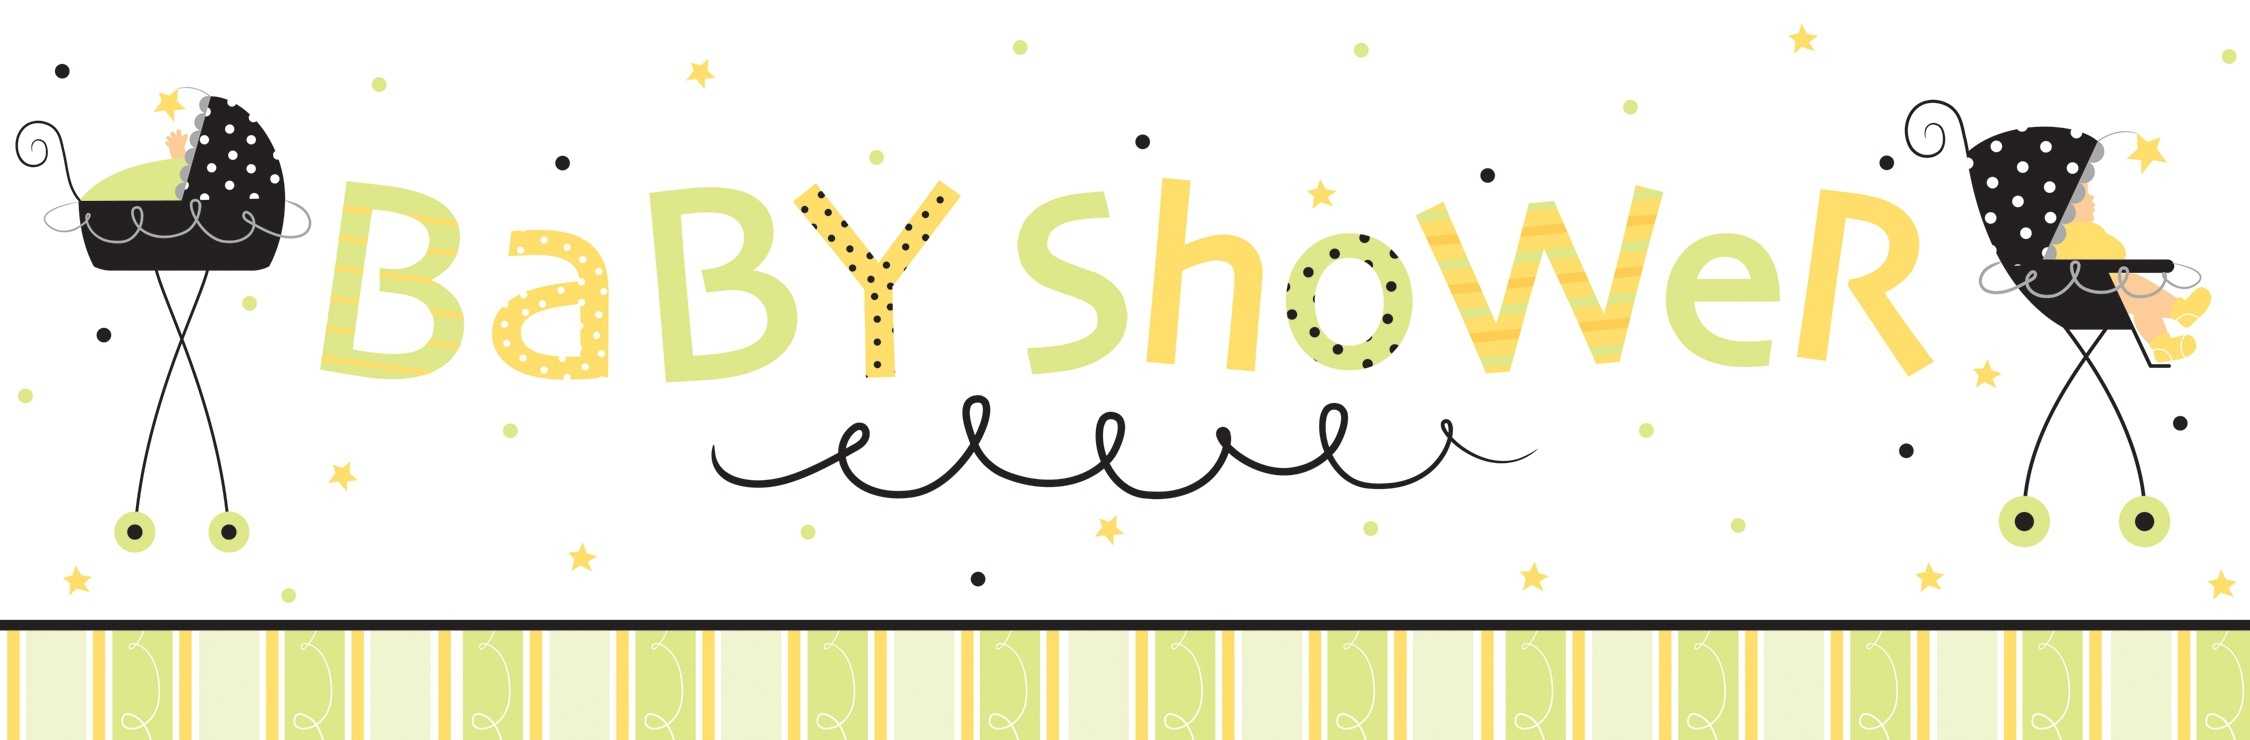 Baby Shower Banner Clipart Intended For Baby Shower Banner Template